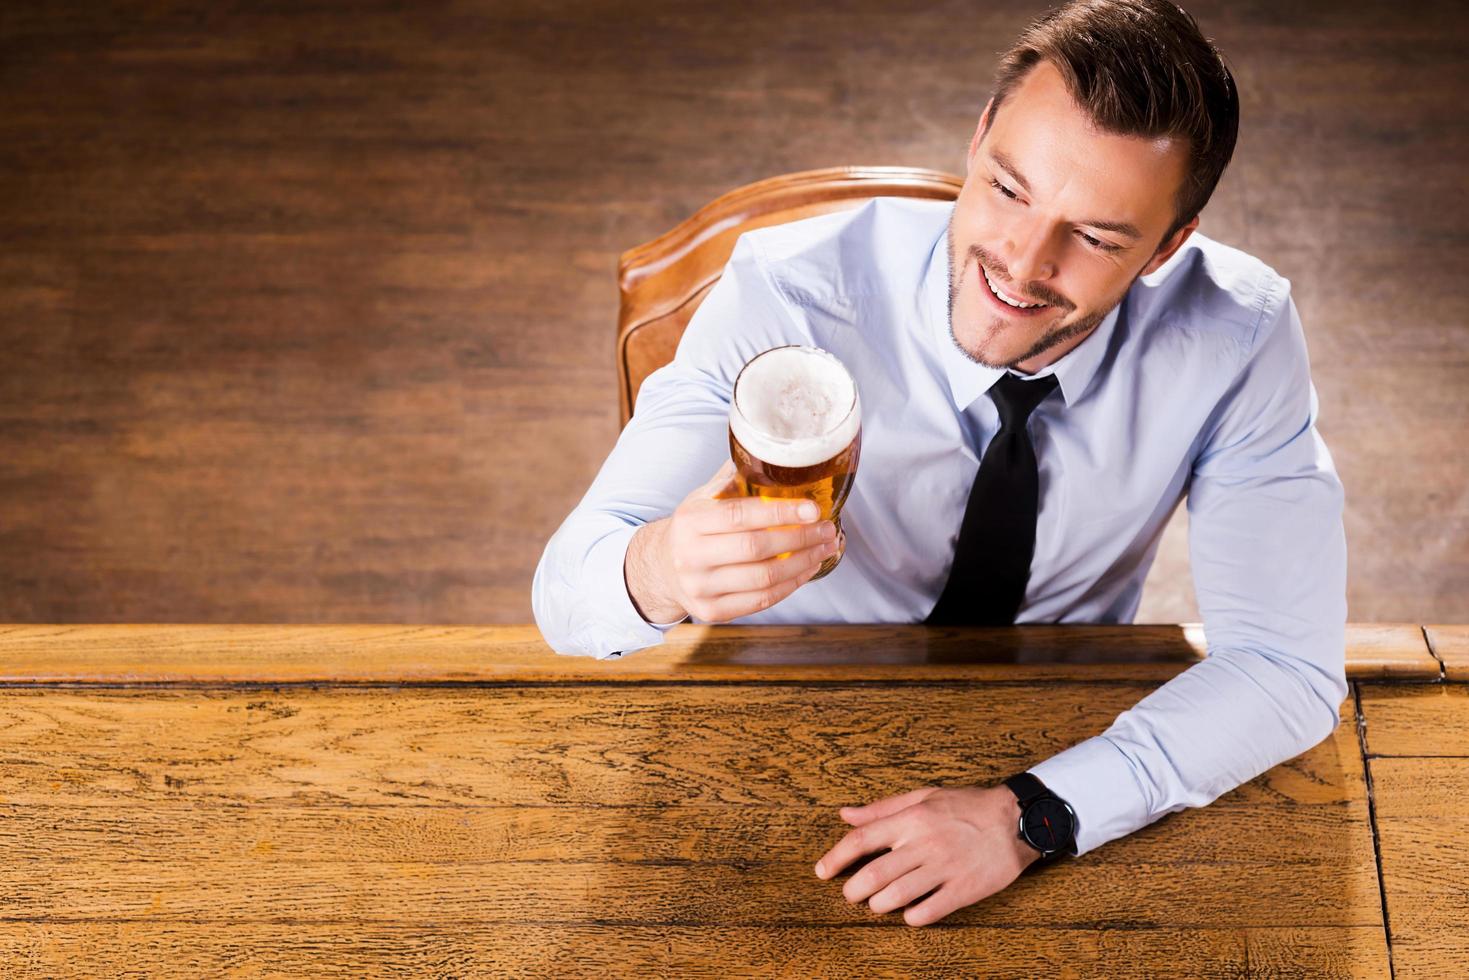 Enjoying his favorite beer. Top view of handsome young man in shirt and tie examining glass with beer and smiling while sitting at the bar counter photo